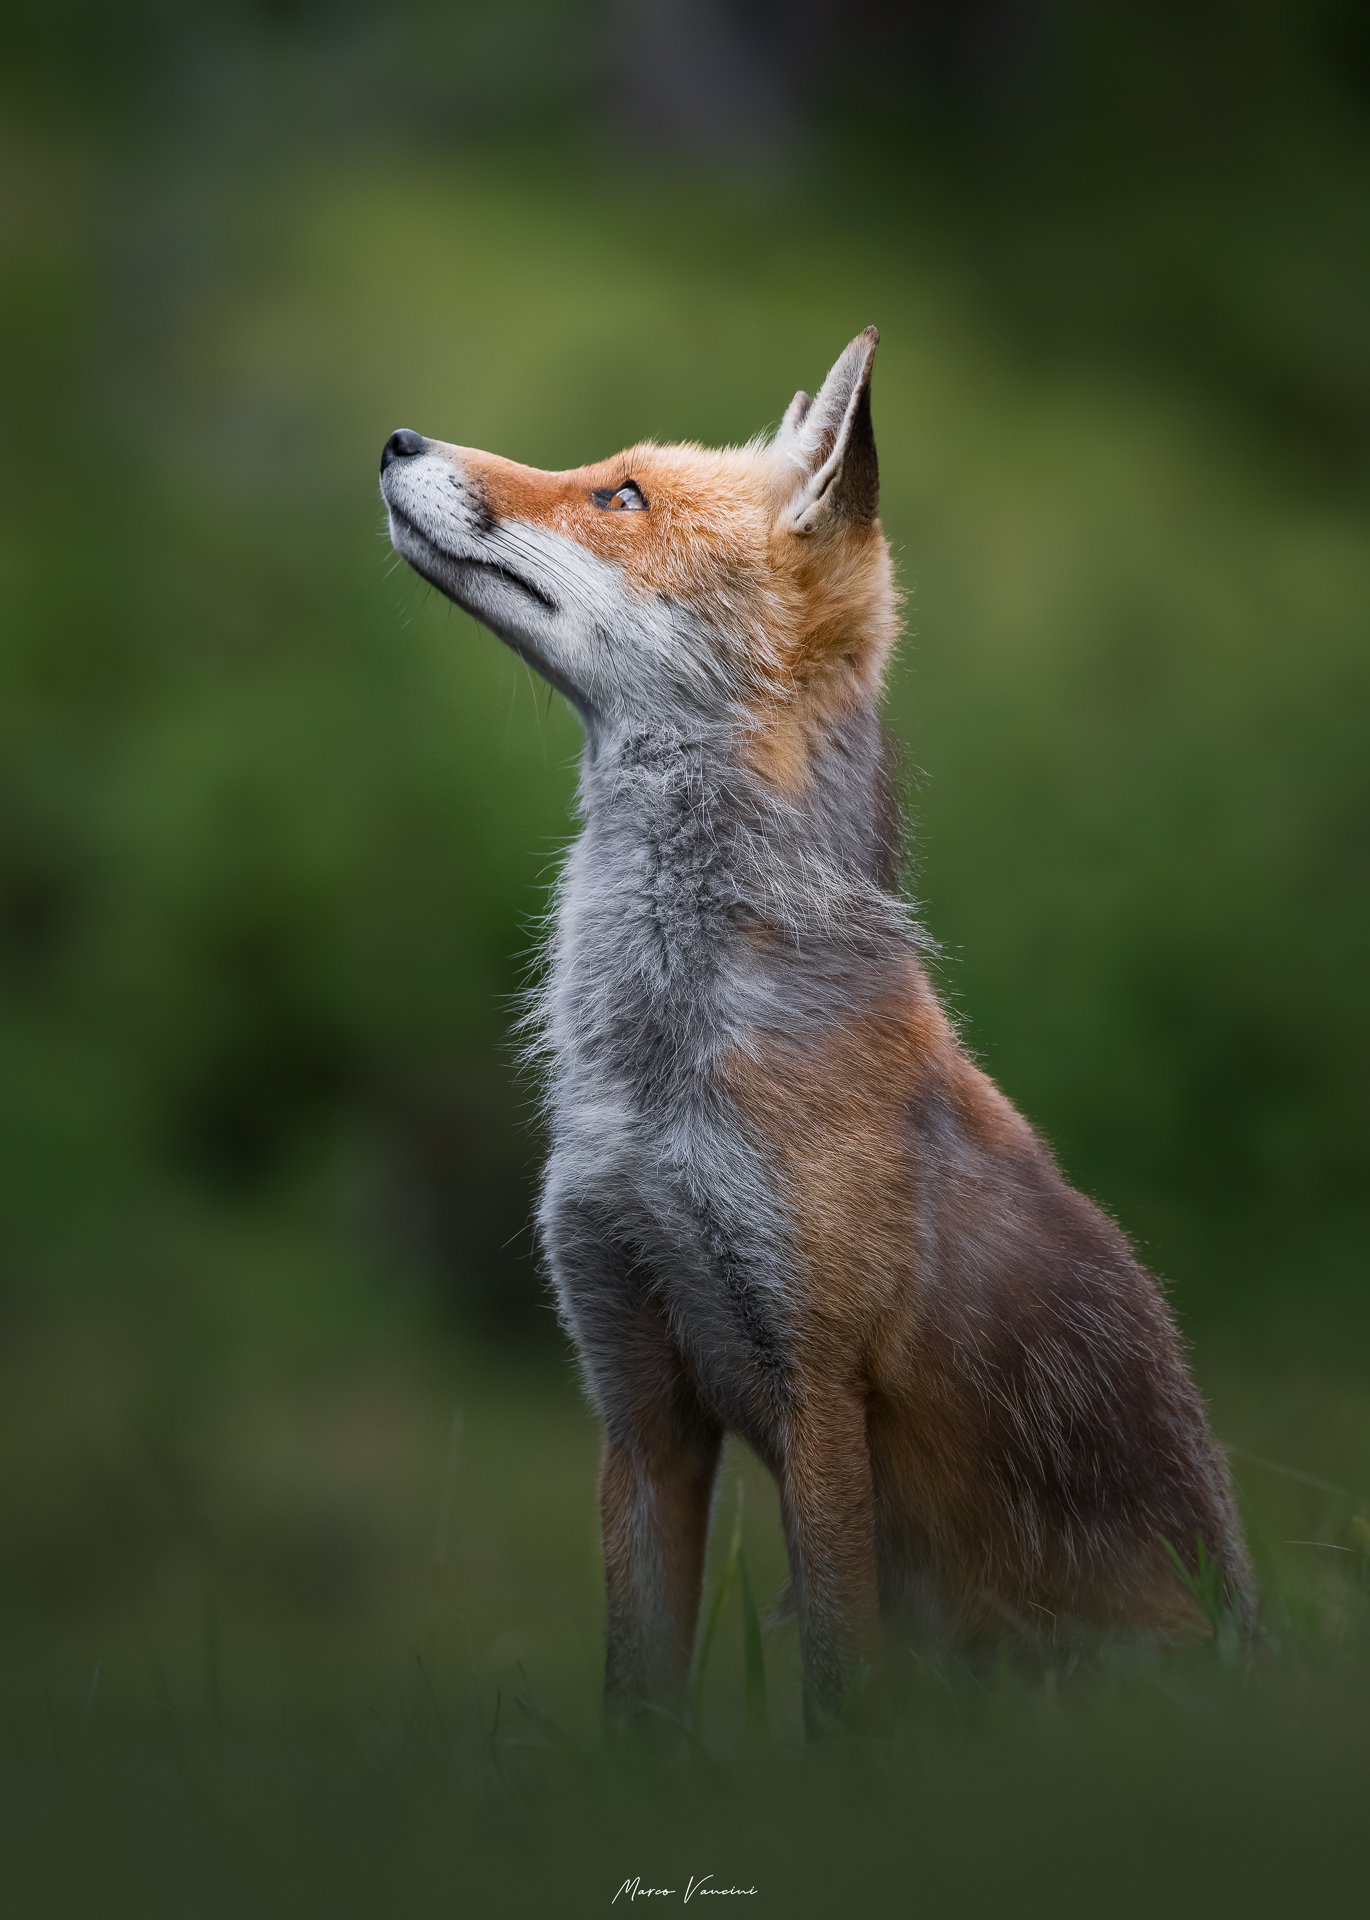 The profile of the fox ...